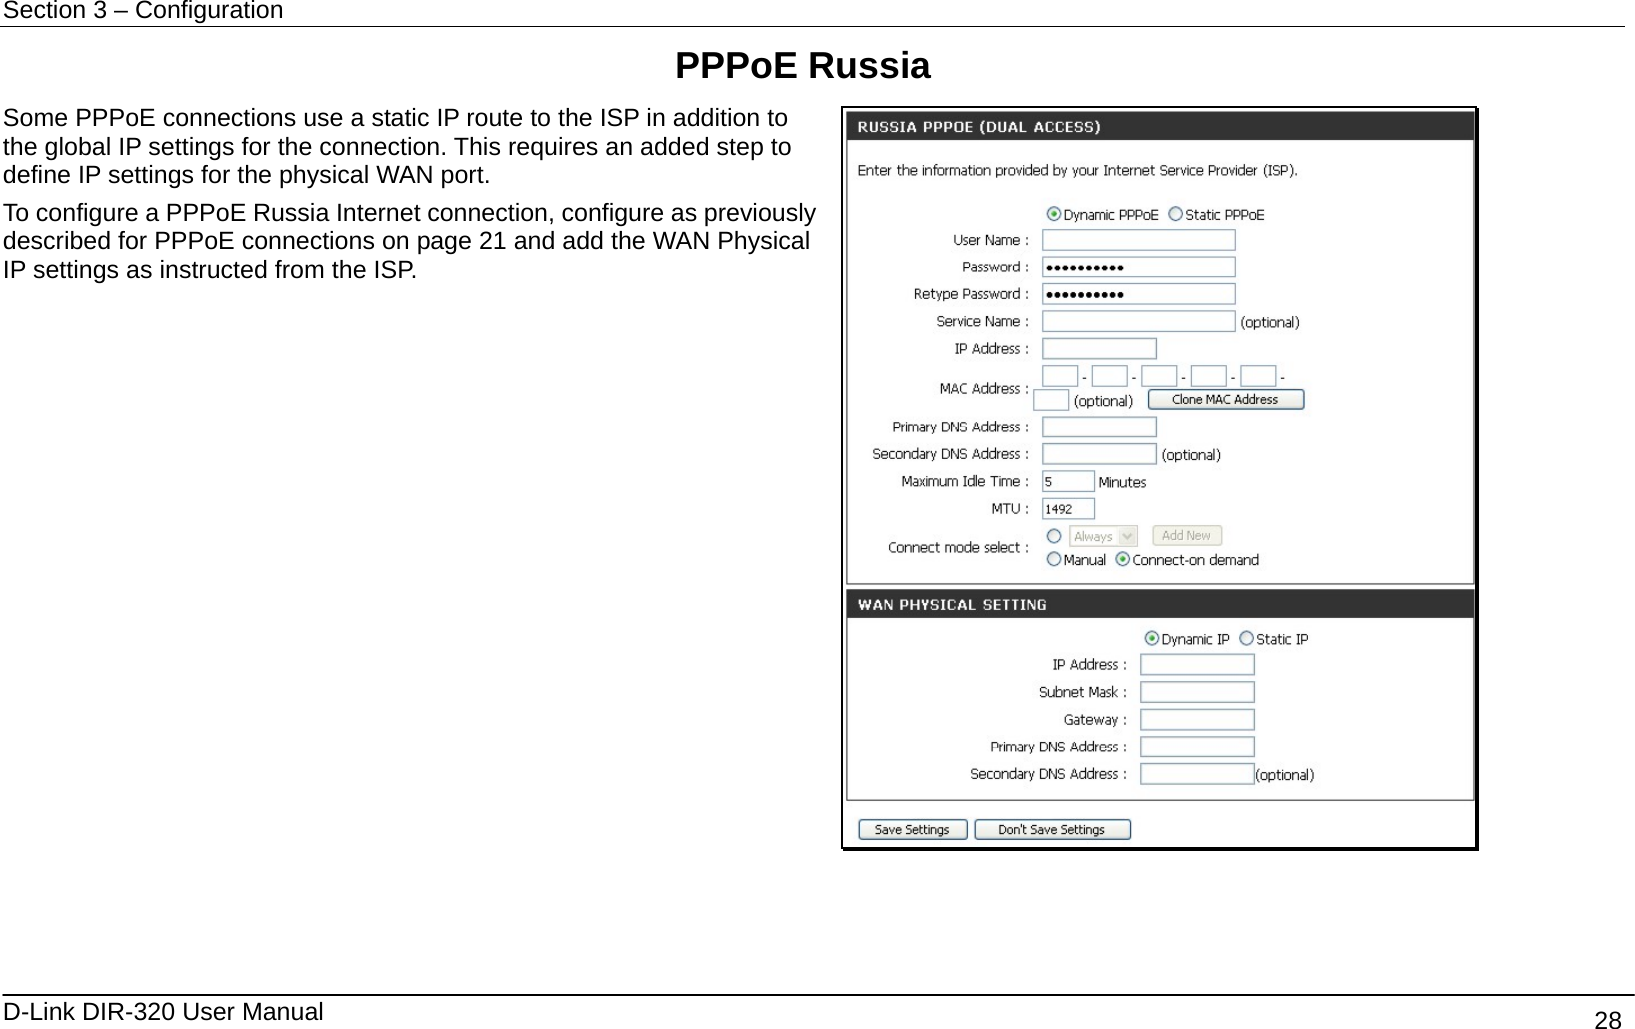 Section 3 – Configuration   D-Link DIR-320 User Manual                                       28 PPPoE Russia Some PPPoE connections use a static IP route to the ISP in addition to the global IP settings for the connection. This requires an added step to define IP settings for the physical WAN port. To configure a PPPoE Russia Internet connection, configure as previously described for PPPoE connections on page 21 and add the WAN Physical IP settings as instructed from the ISP.    